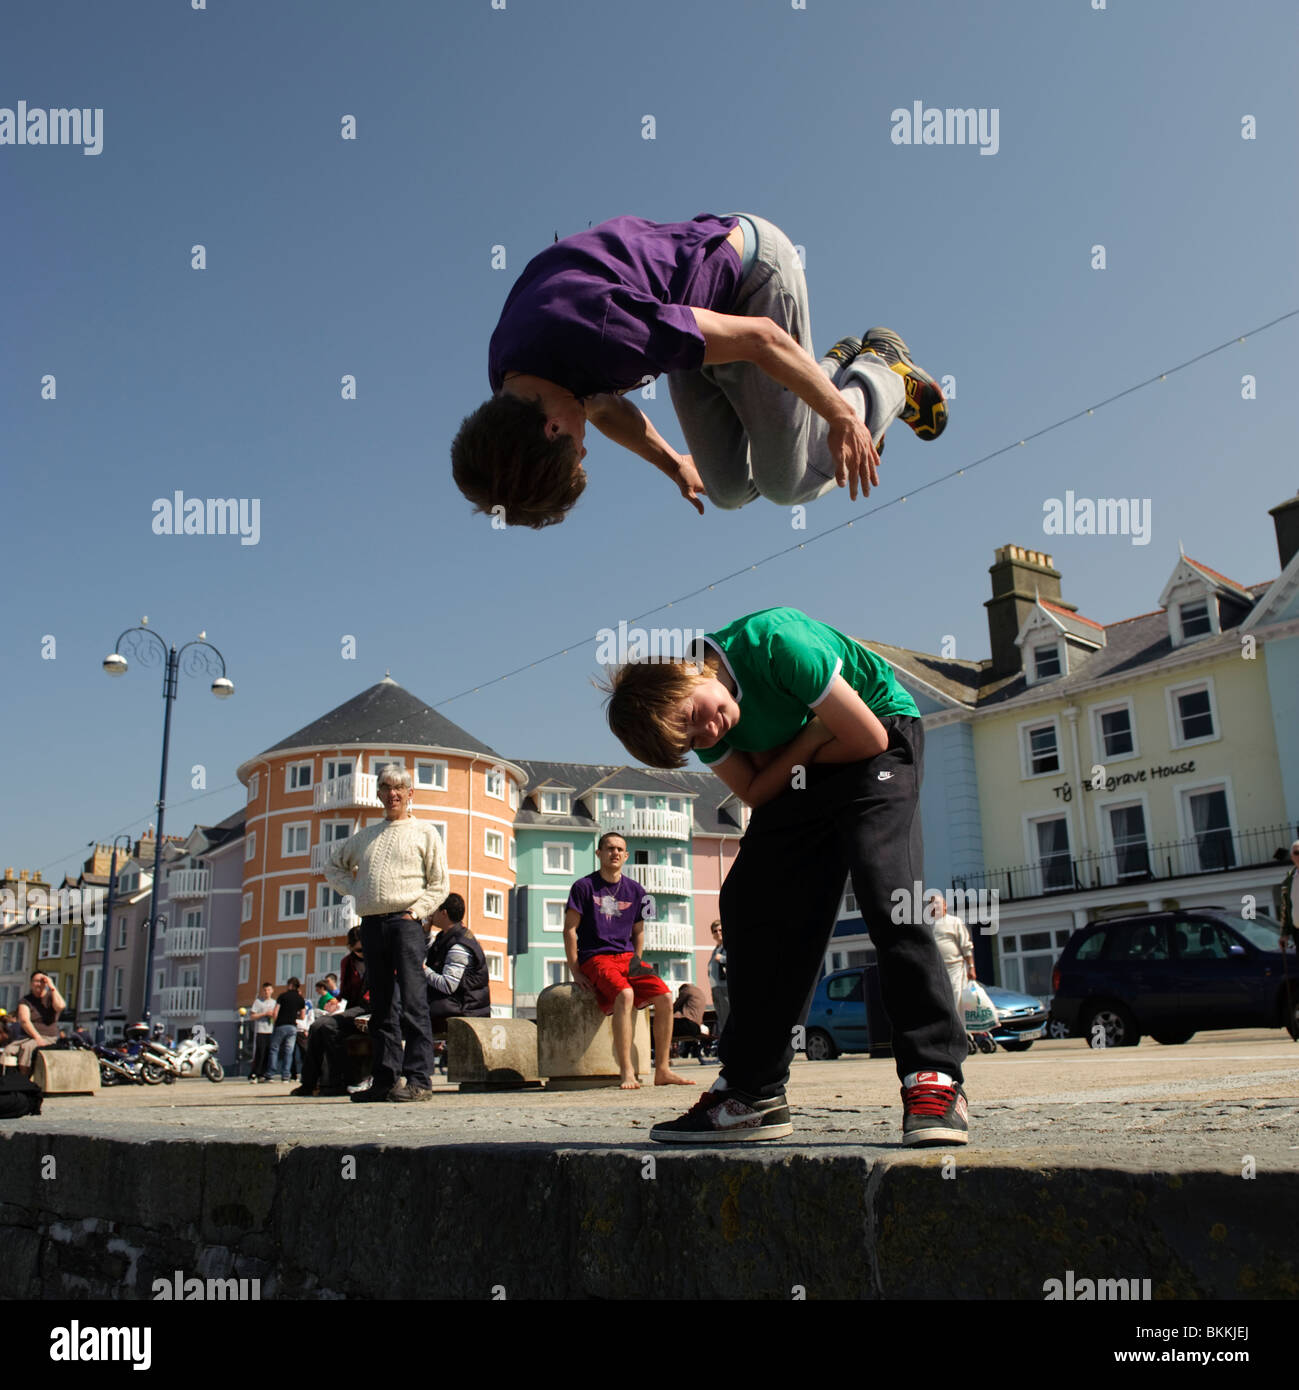 a young man practicing Freerunning parkour somersaulting over his friend on a sunny day Aberystwyth Wales UK Stock Photo